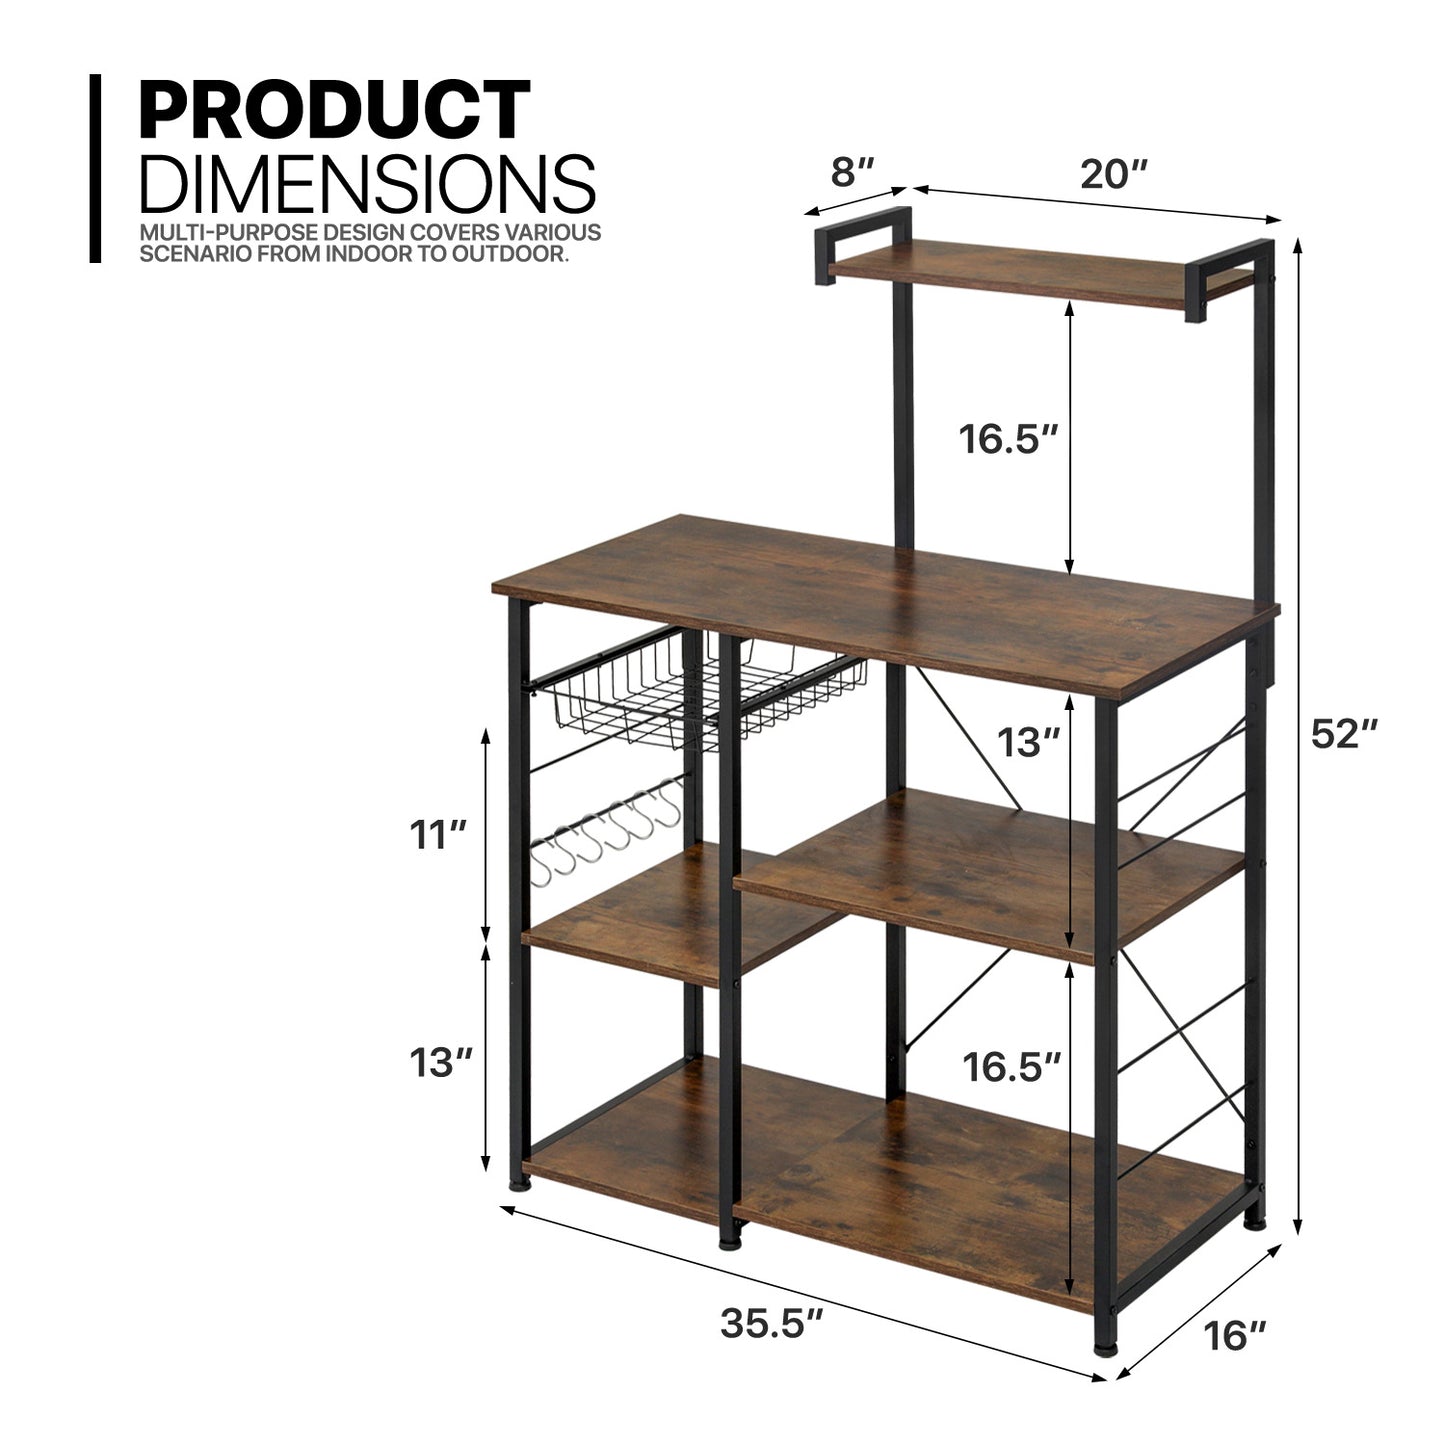 Kitchen Baker's Rack 35.5"x16"x52" - with Movable Basket